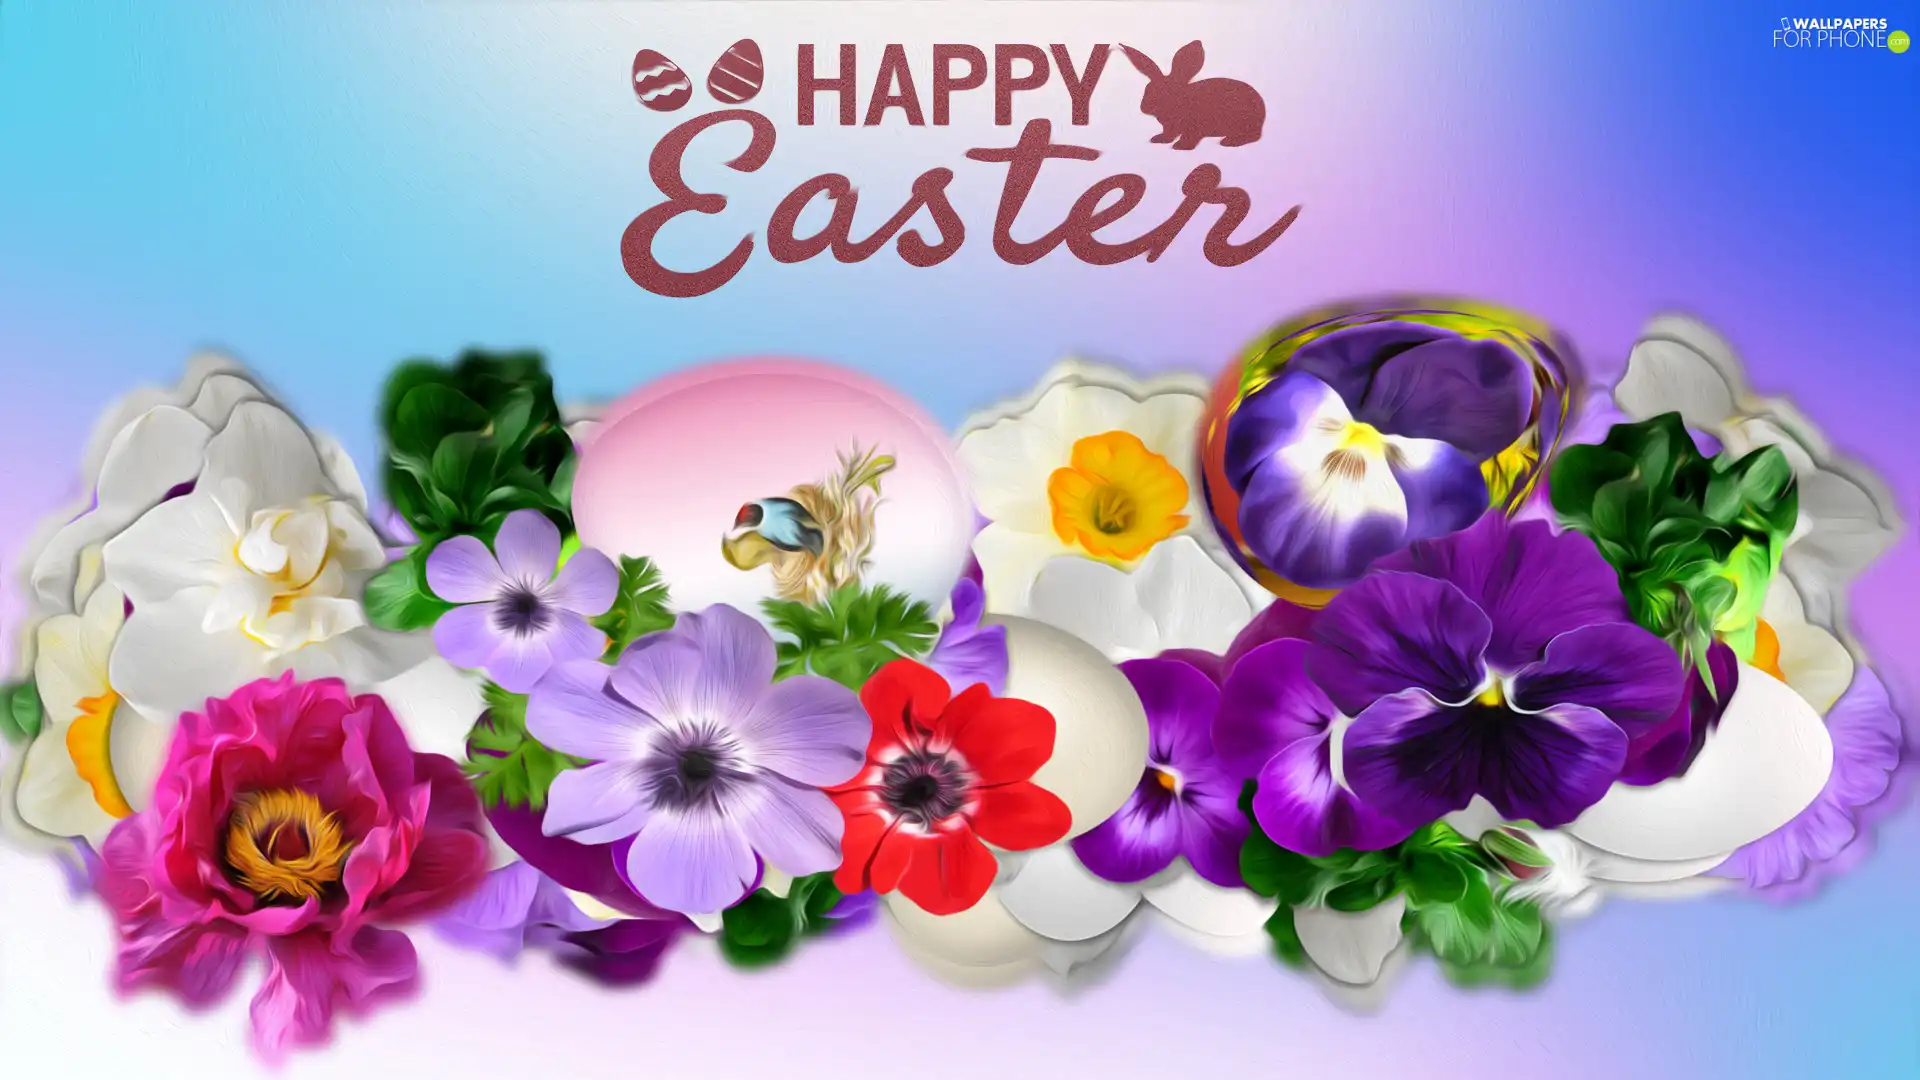 Flowers, text, graphics, Easter